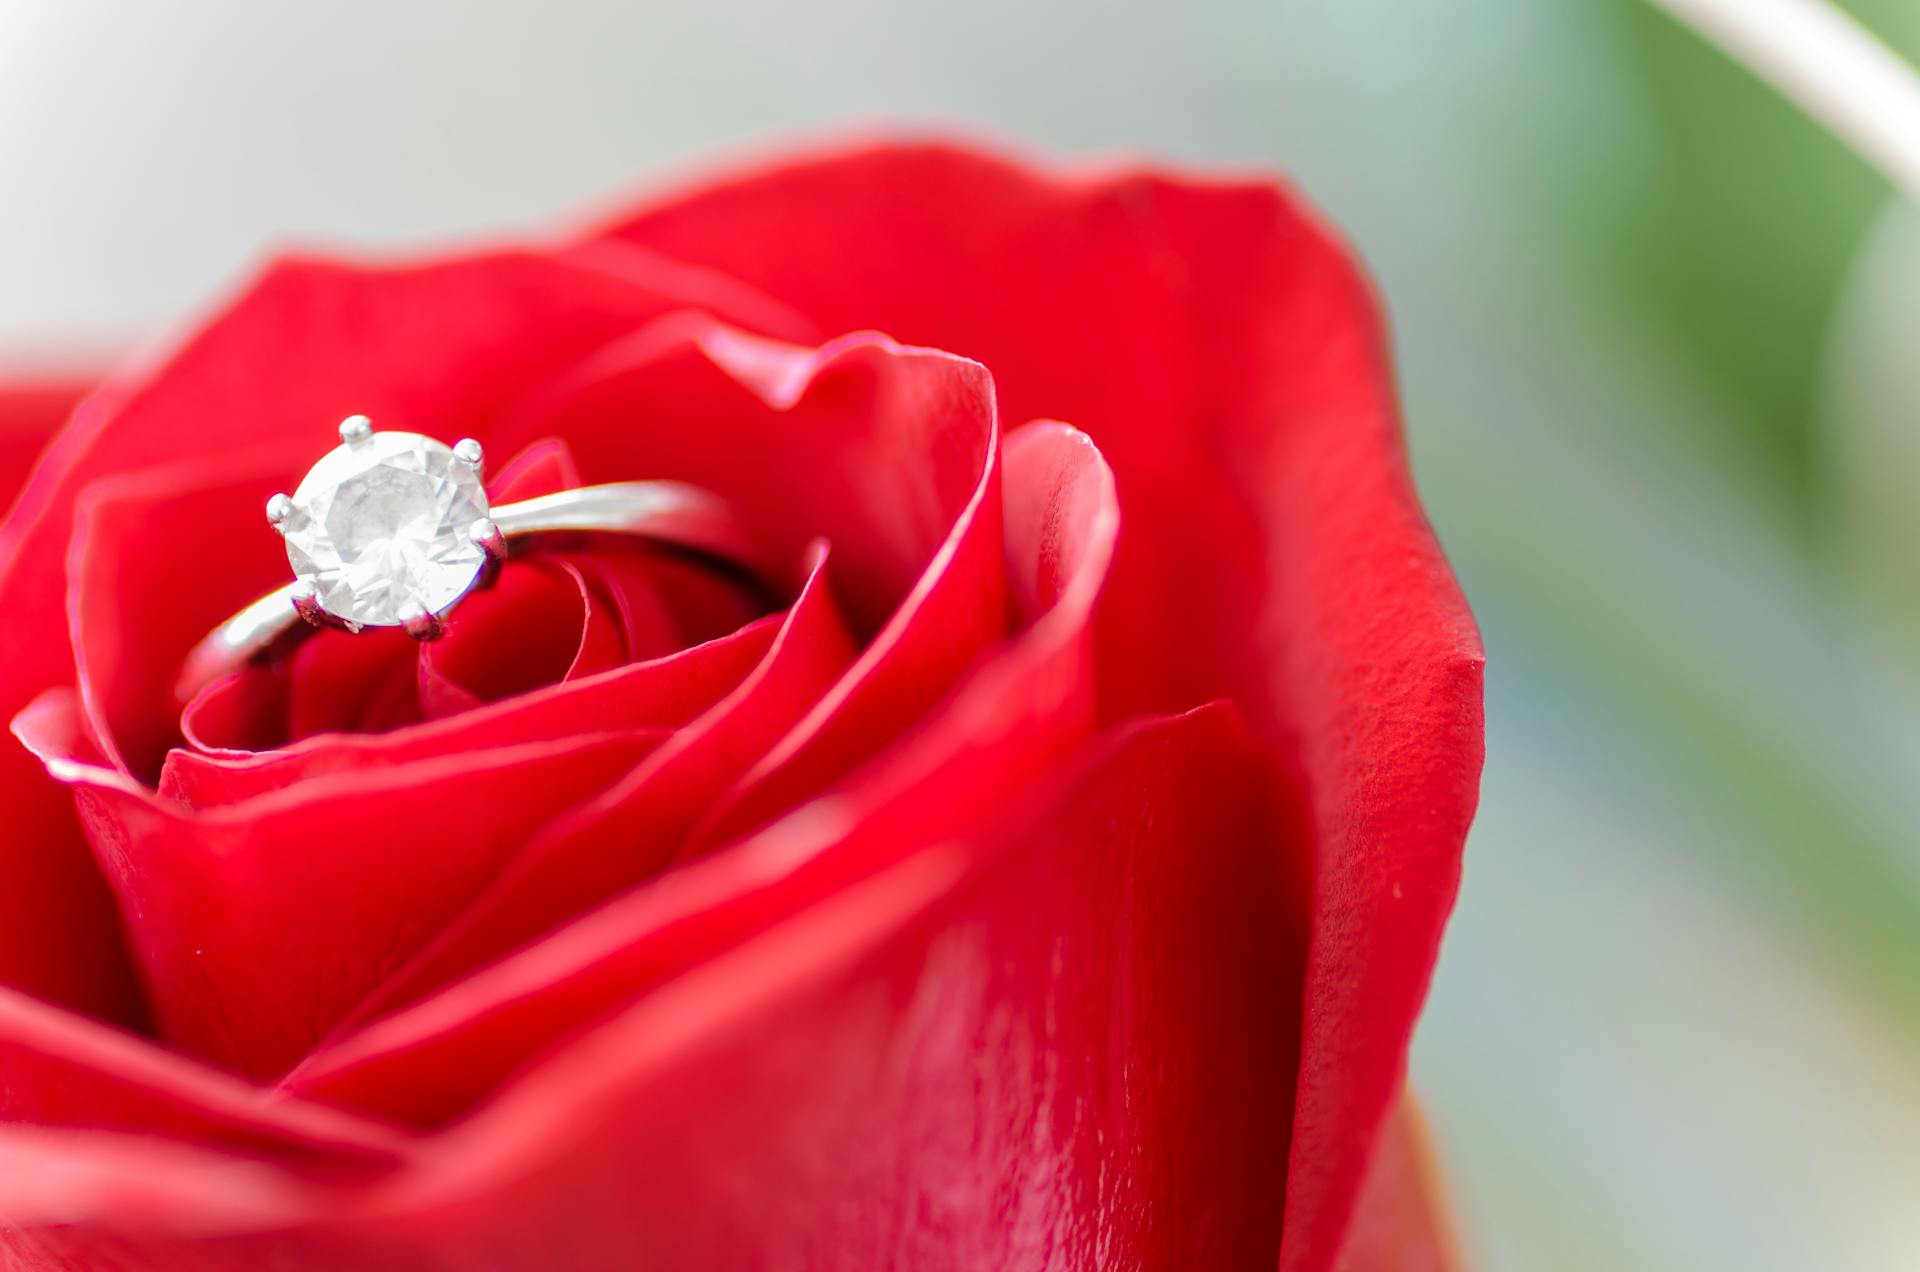 An engagement ring nestled in a rose | Source: Pexels